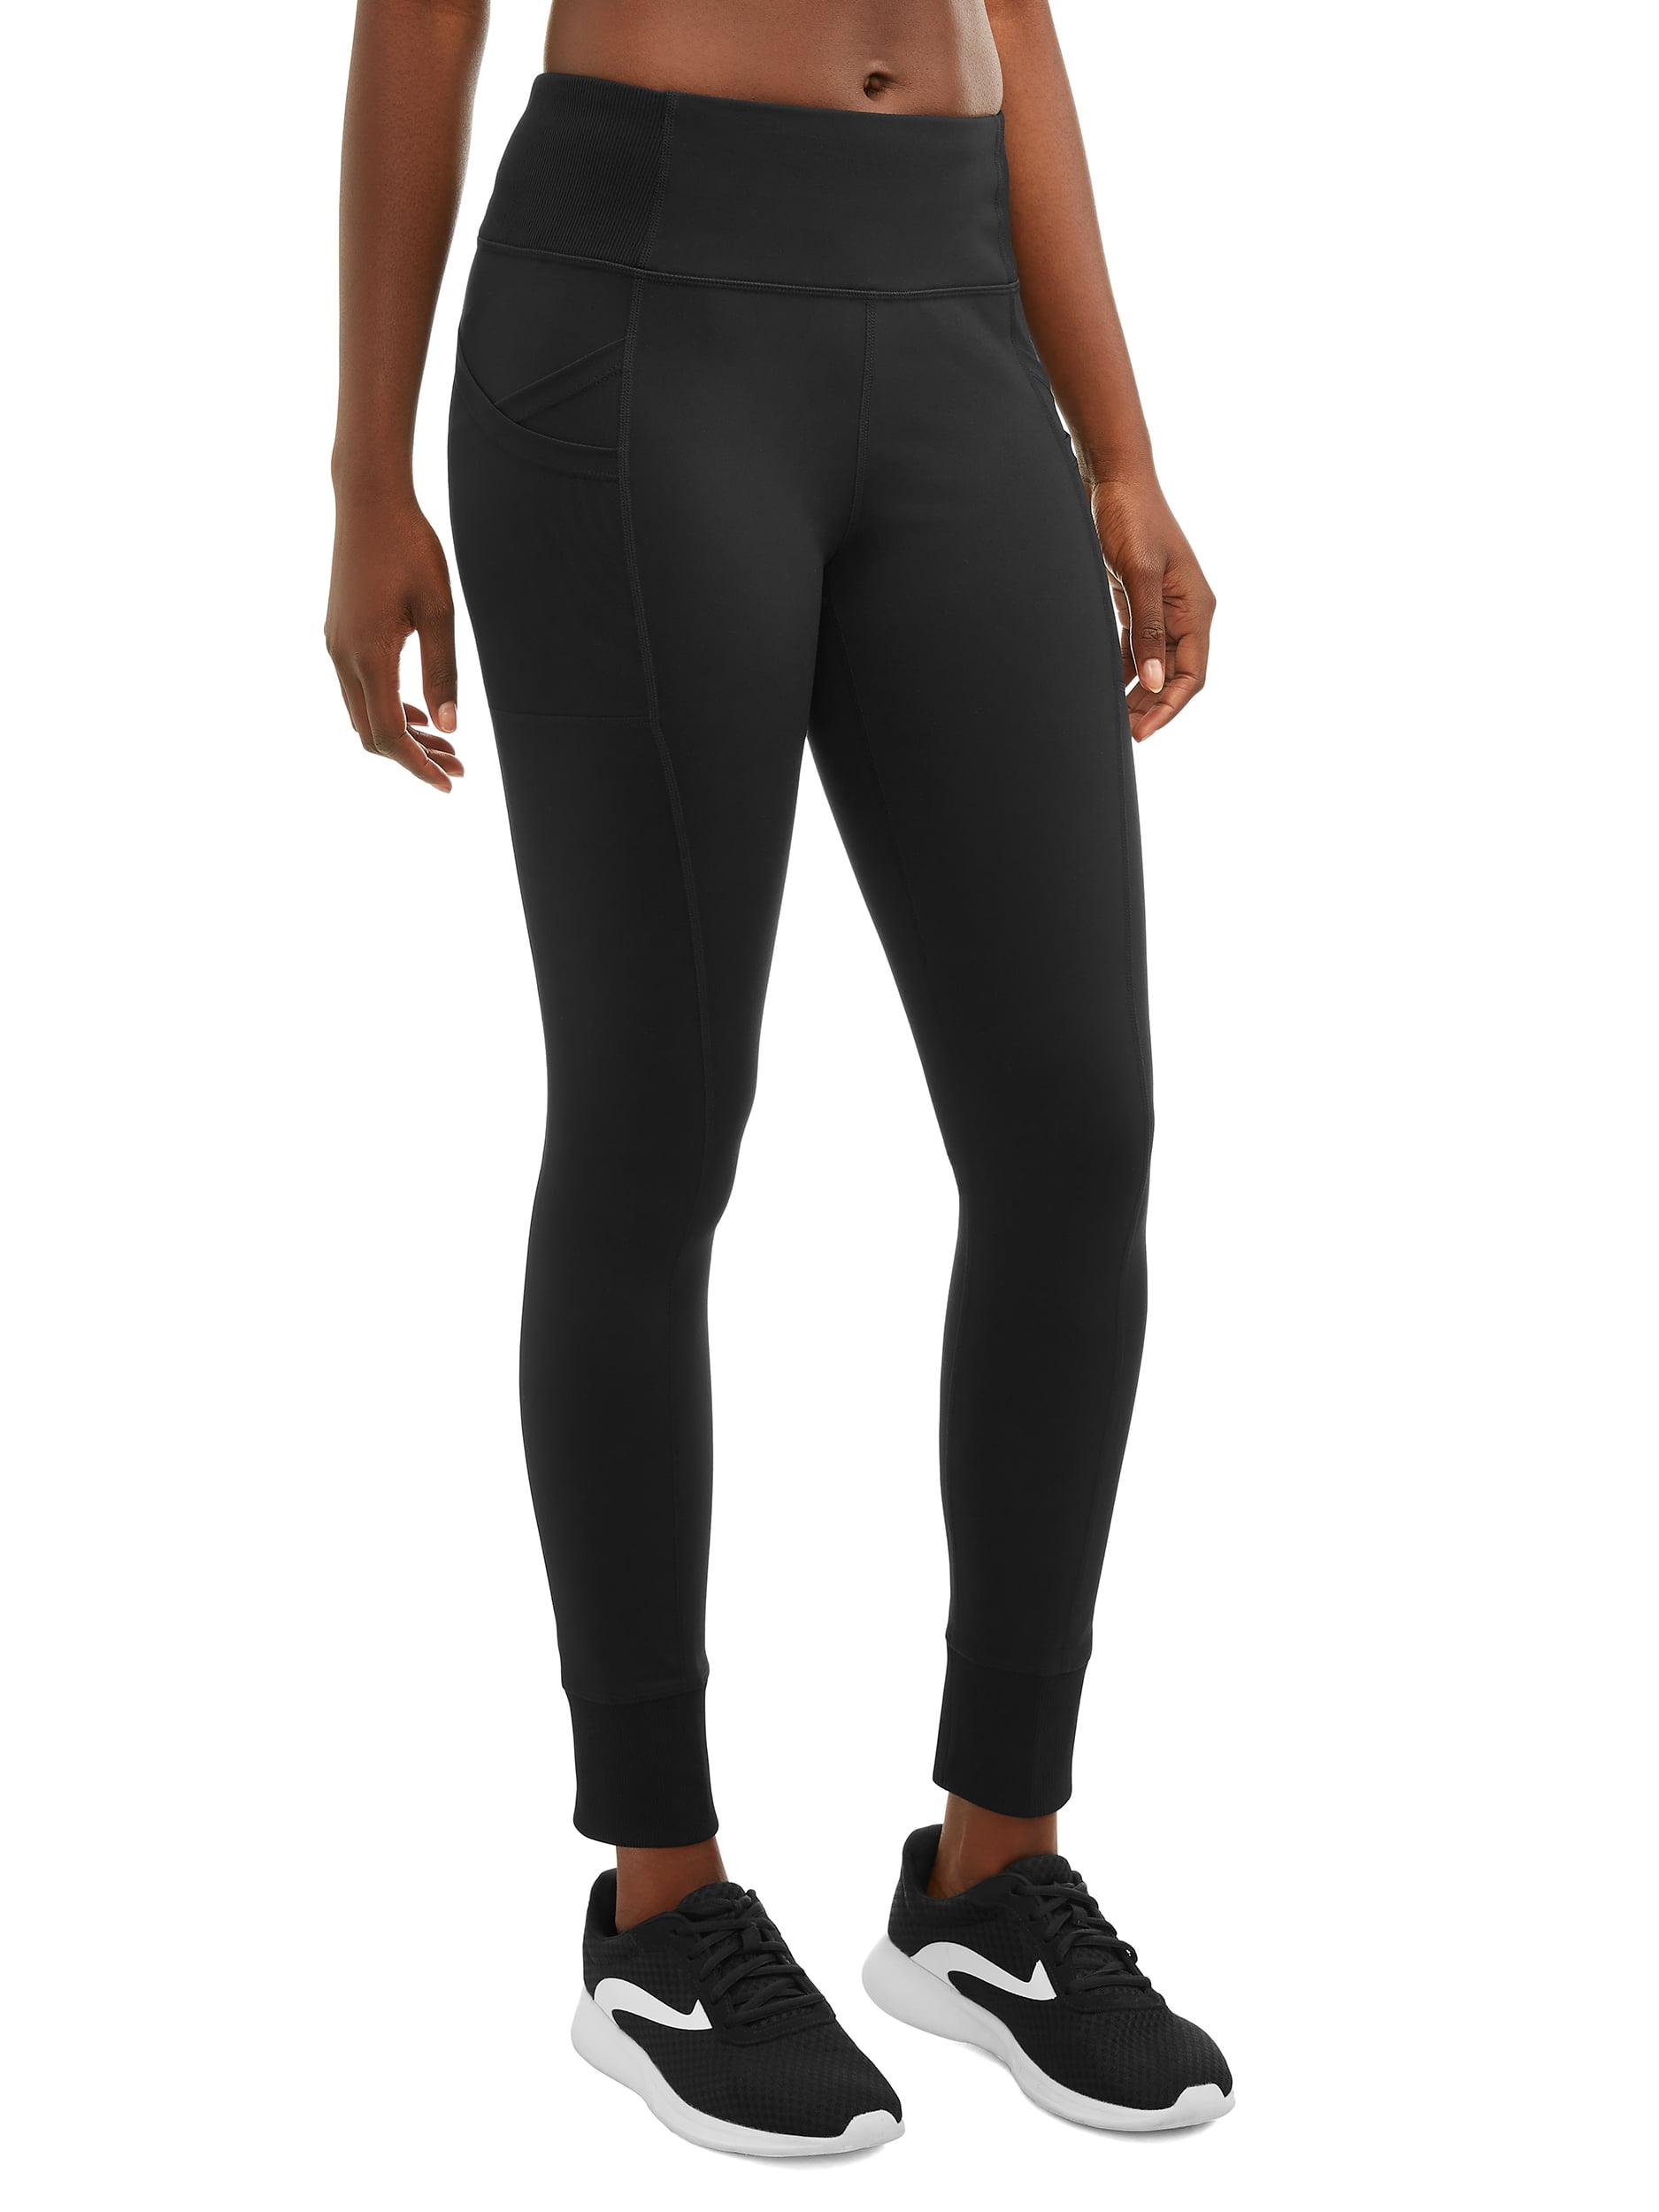 Women's Active High Waisted Workout Leggings with Side Pocket 